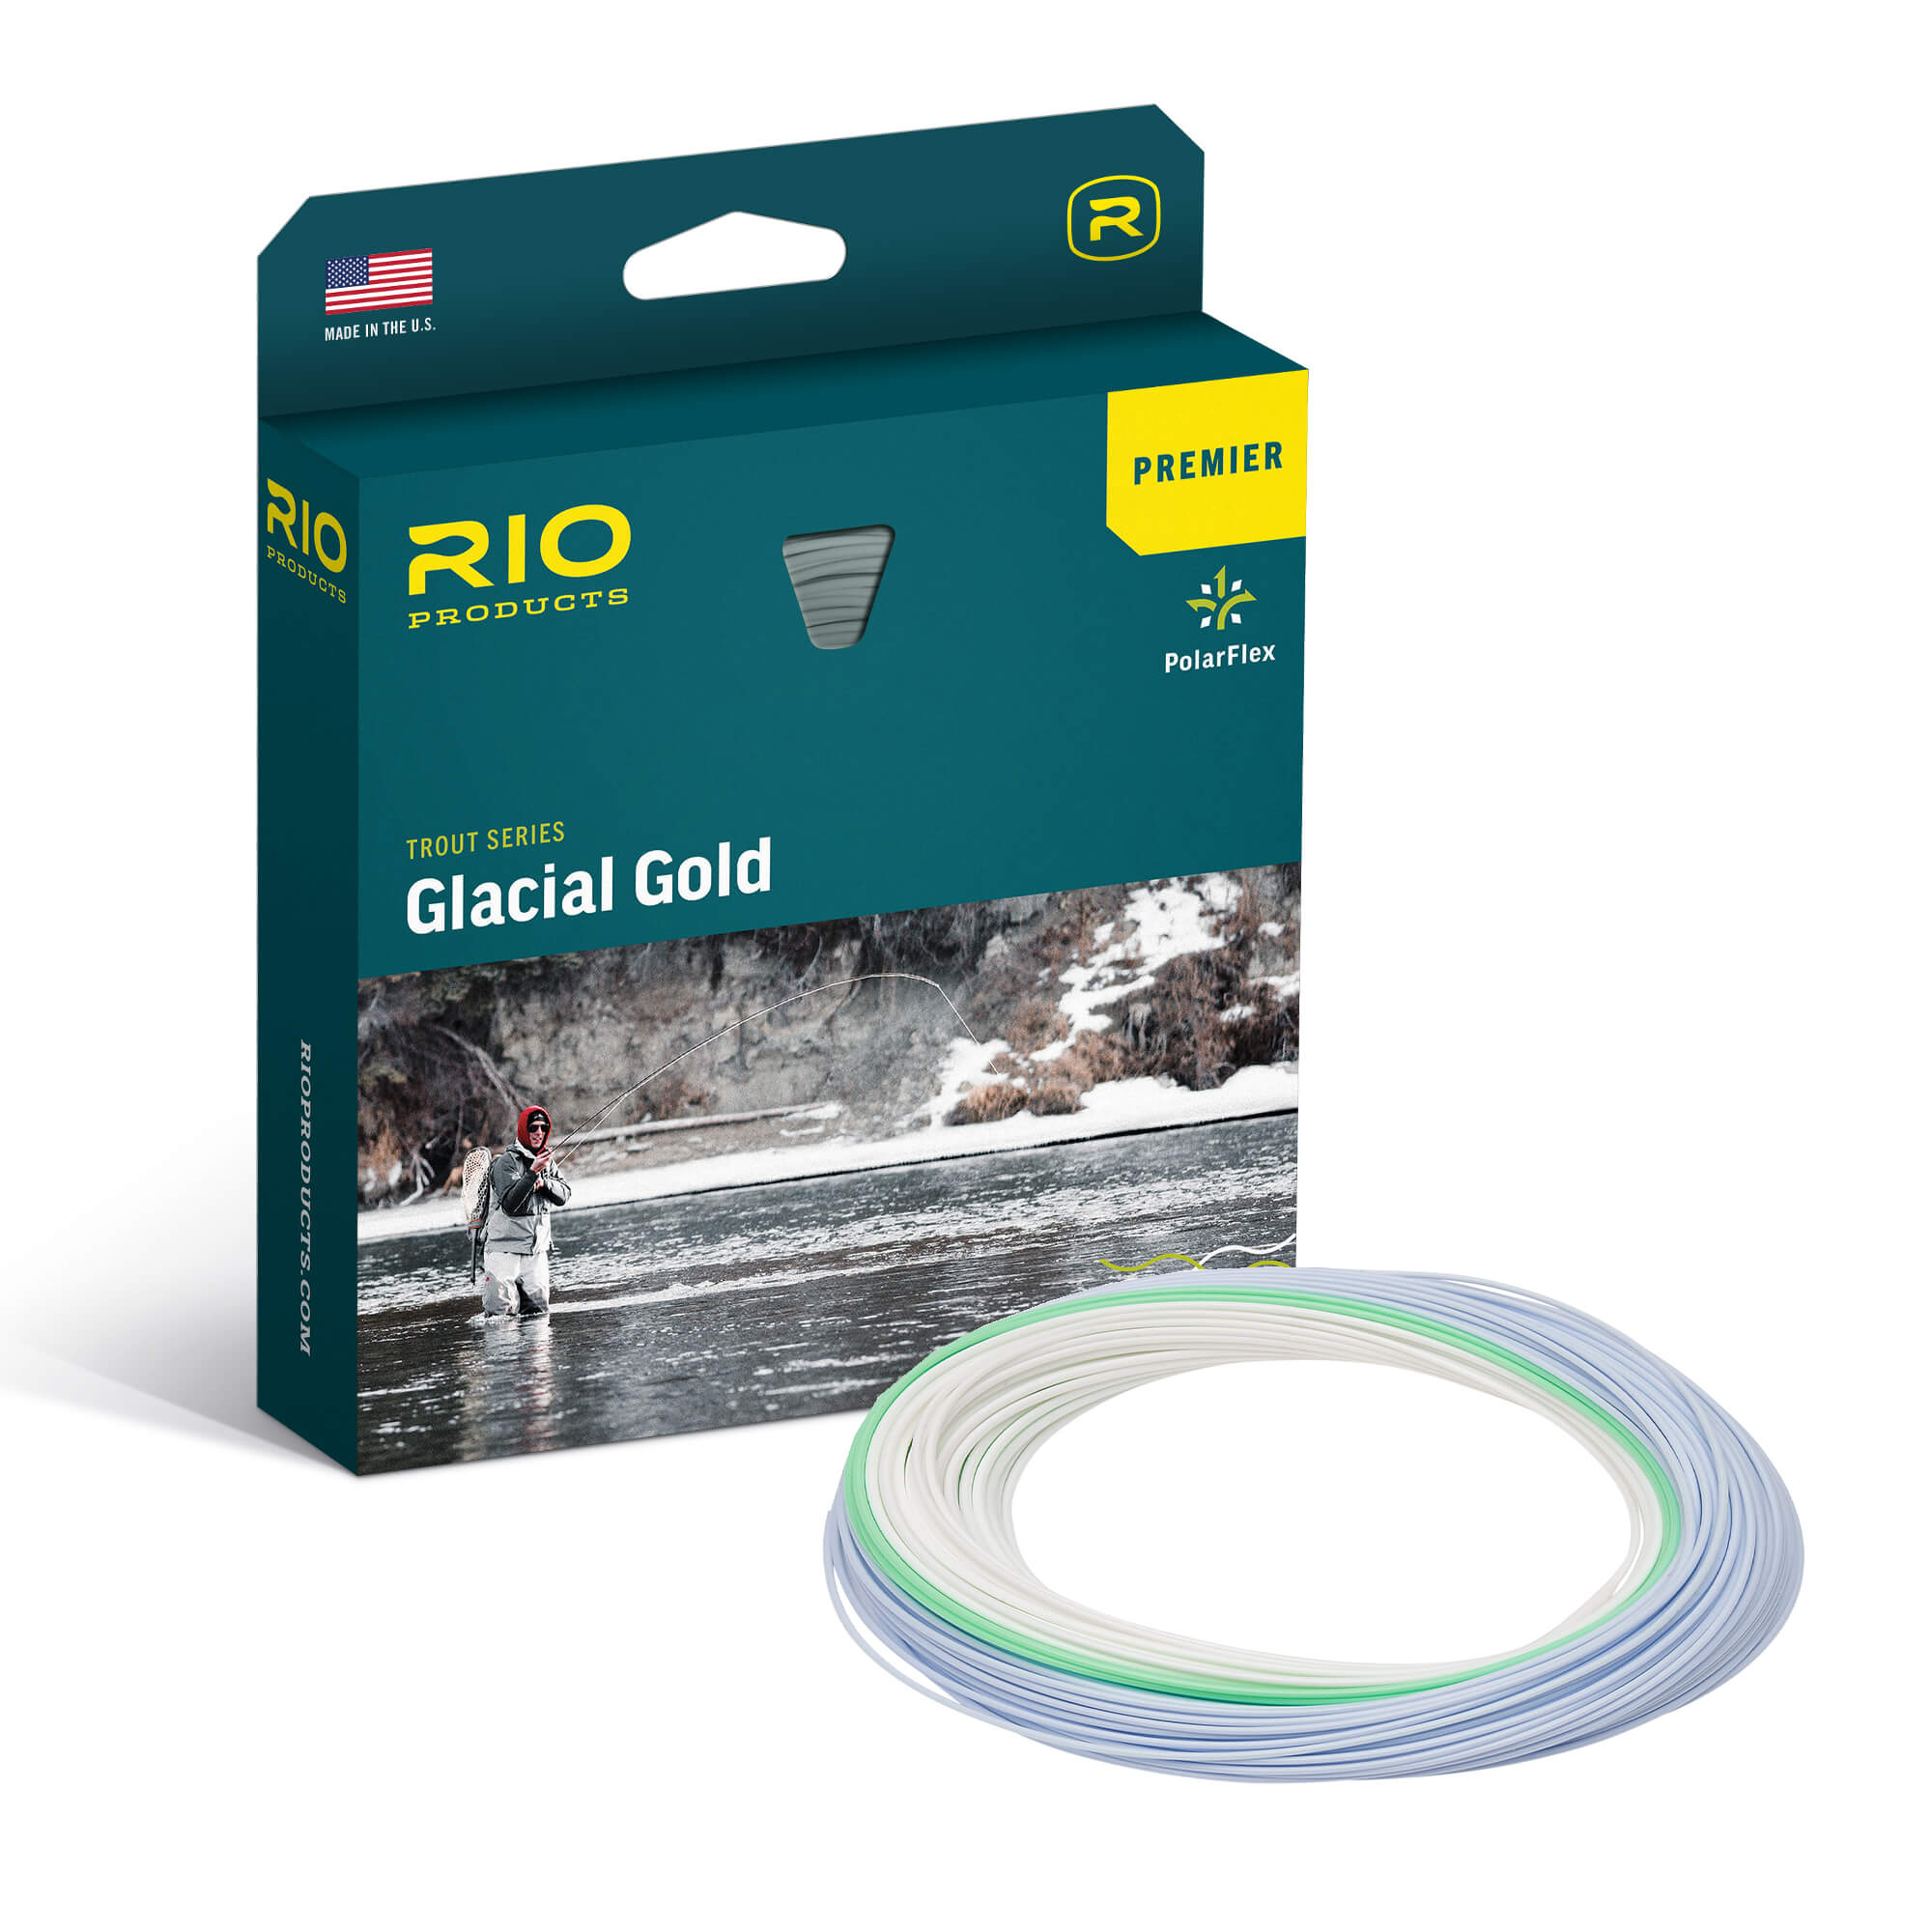 RIO PREMIER GLACIAL GOLD FLY LINE – Guide Flyfishing, Fly Fishing Rods,  Reels, Sage, Redington, RIO